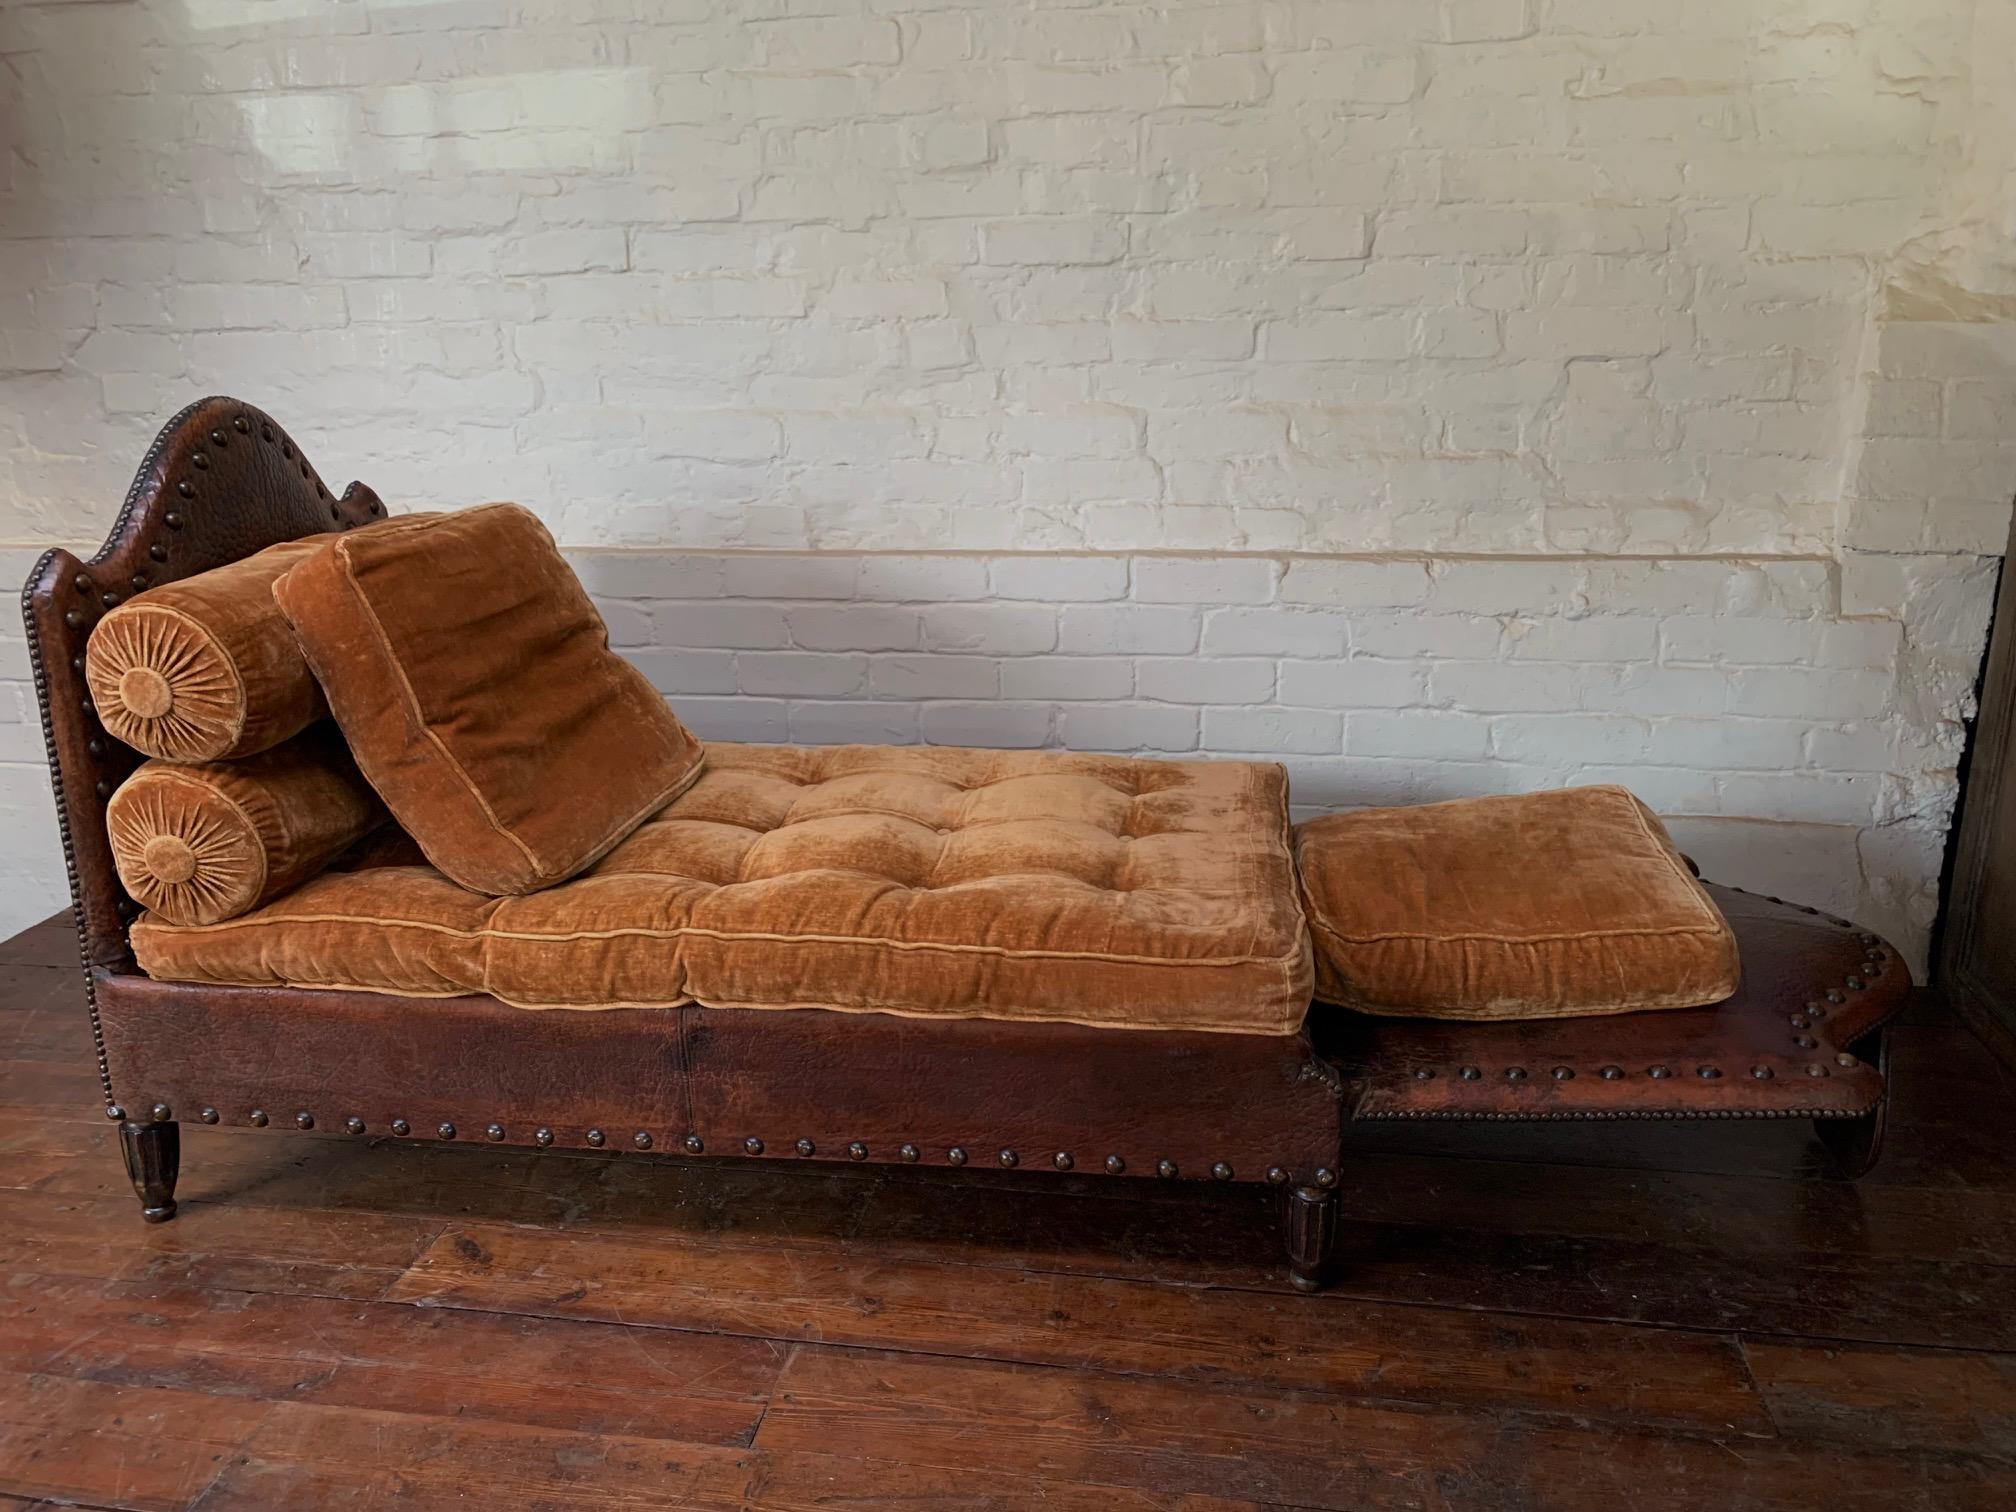 An Exquisite and Rare French Leather Daybed Completely Original, Circa 1920's For Sale 8